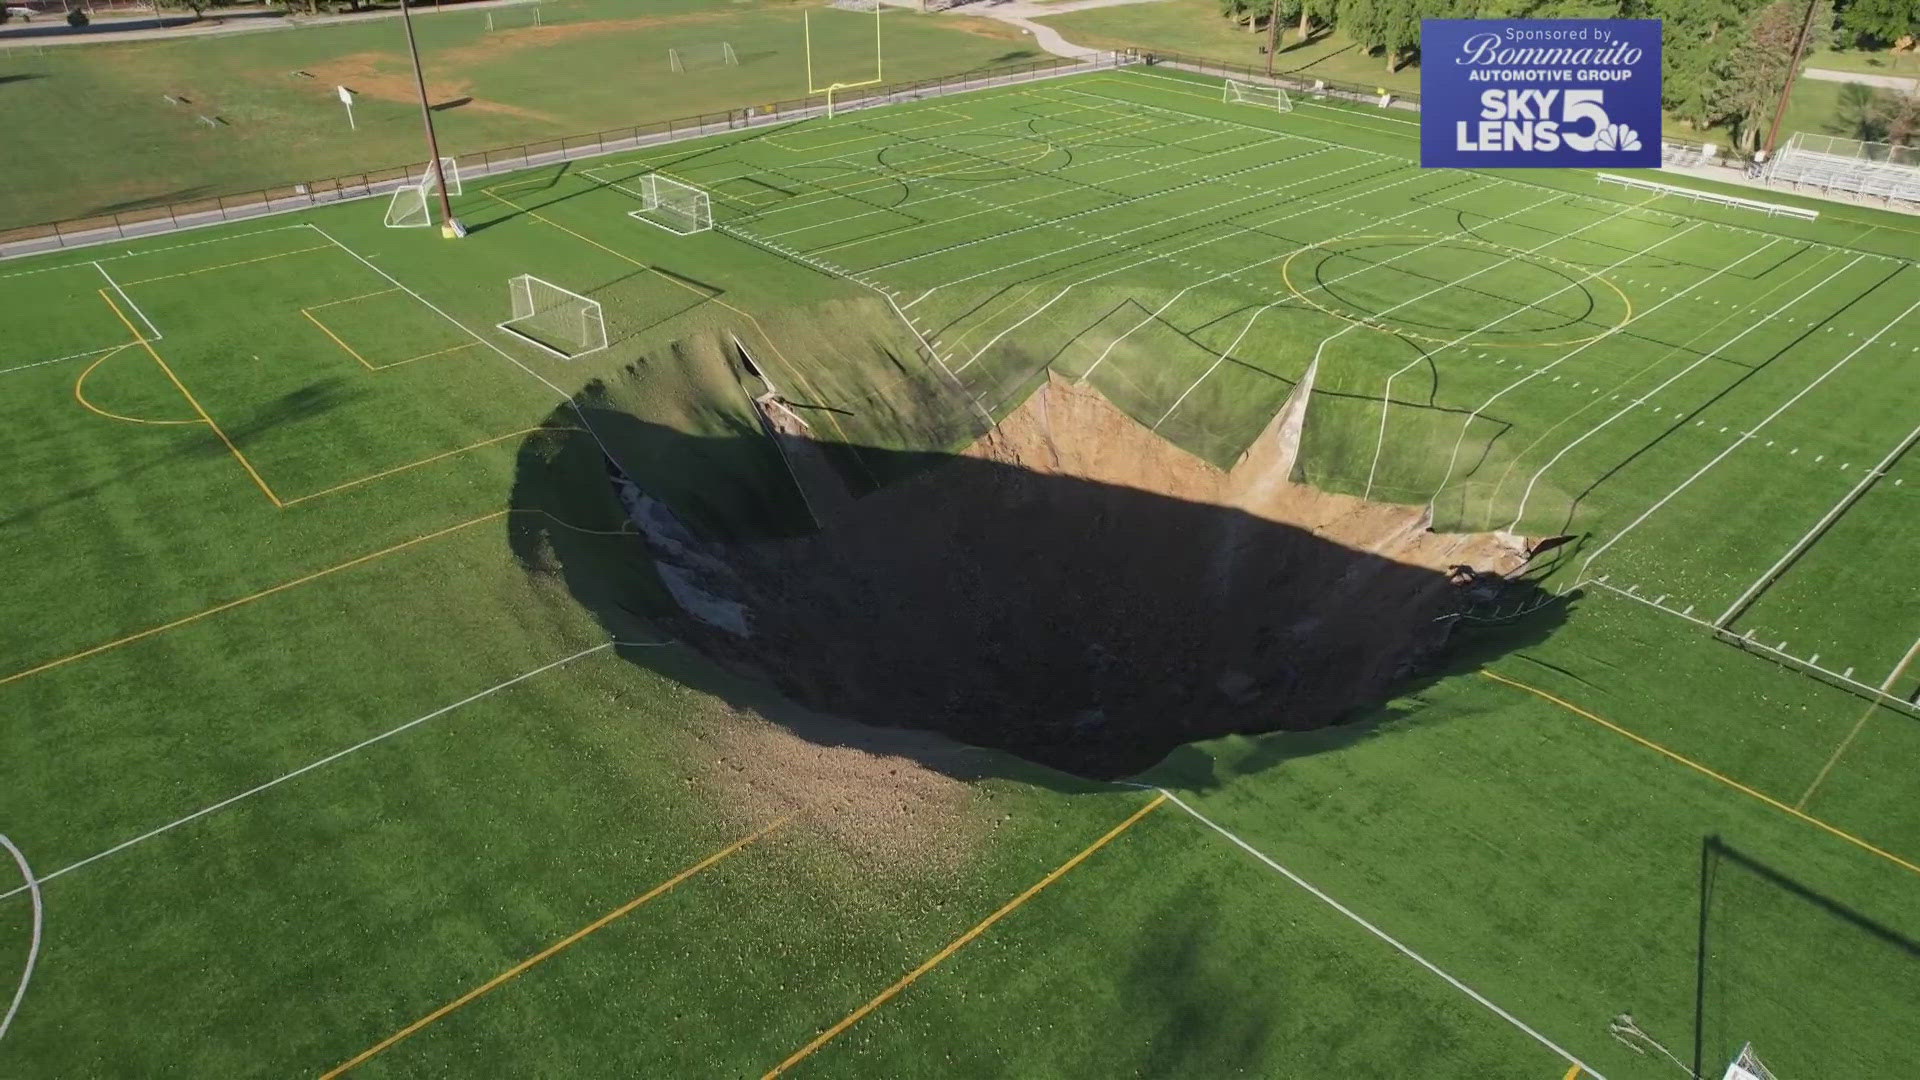 Illinois Gov. J.B. Pritzker is reacting to that massive sinkhole in Alton's Gordon Moore Park. The sinkhole suddenly formed Wednesday morning in the soccer fields.